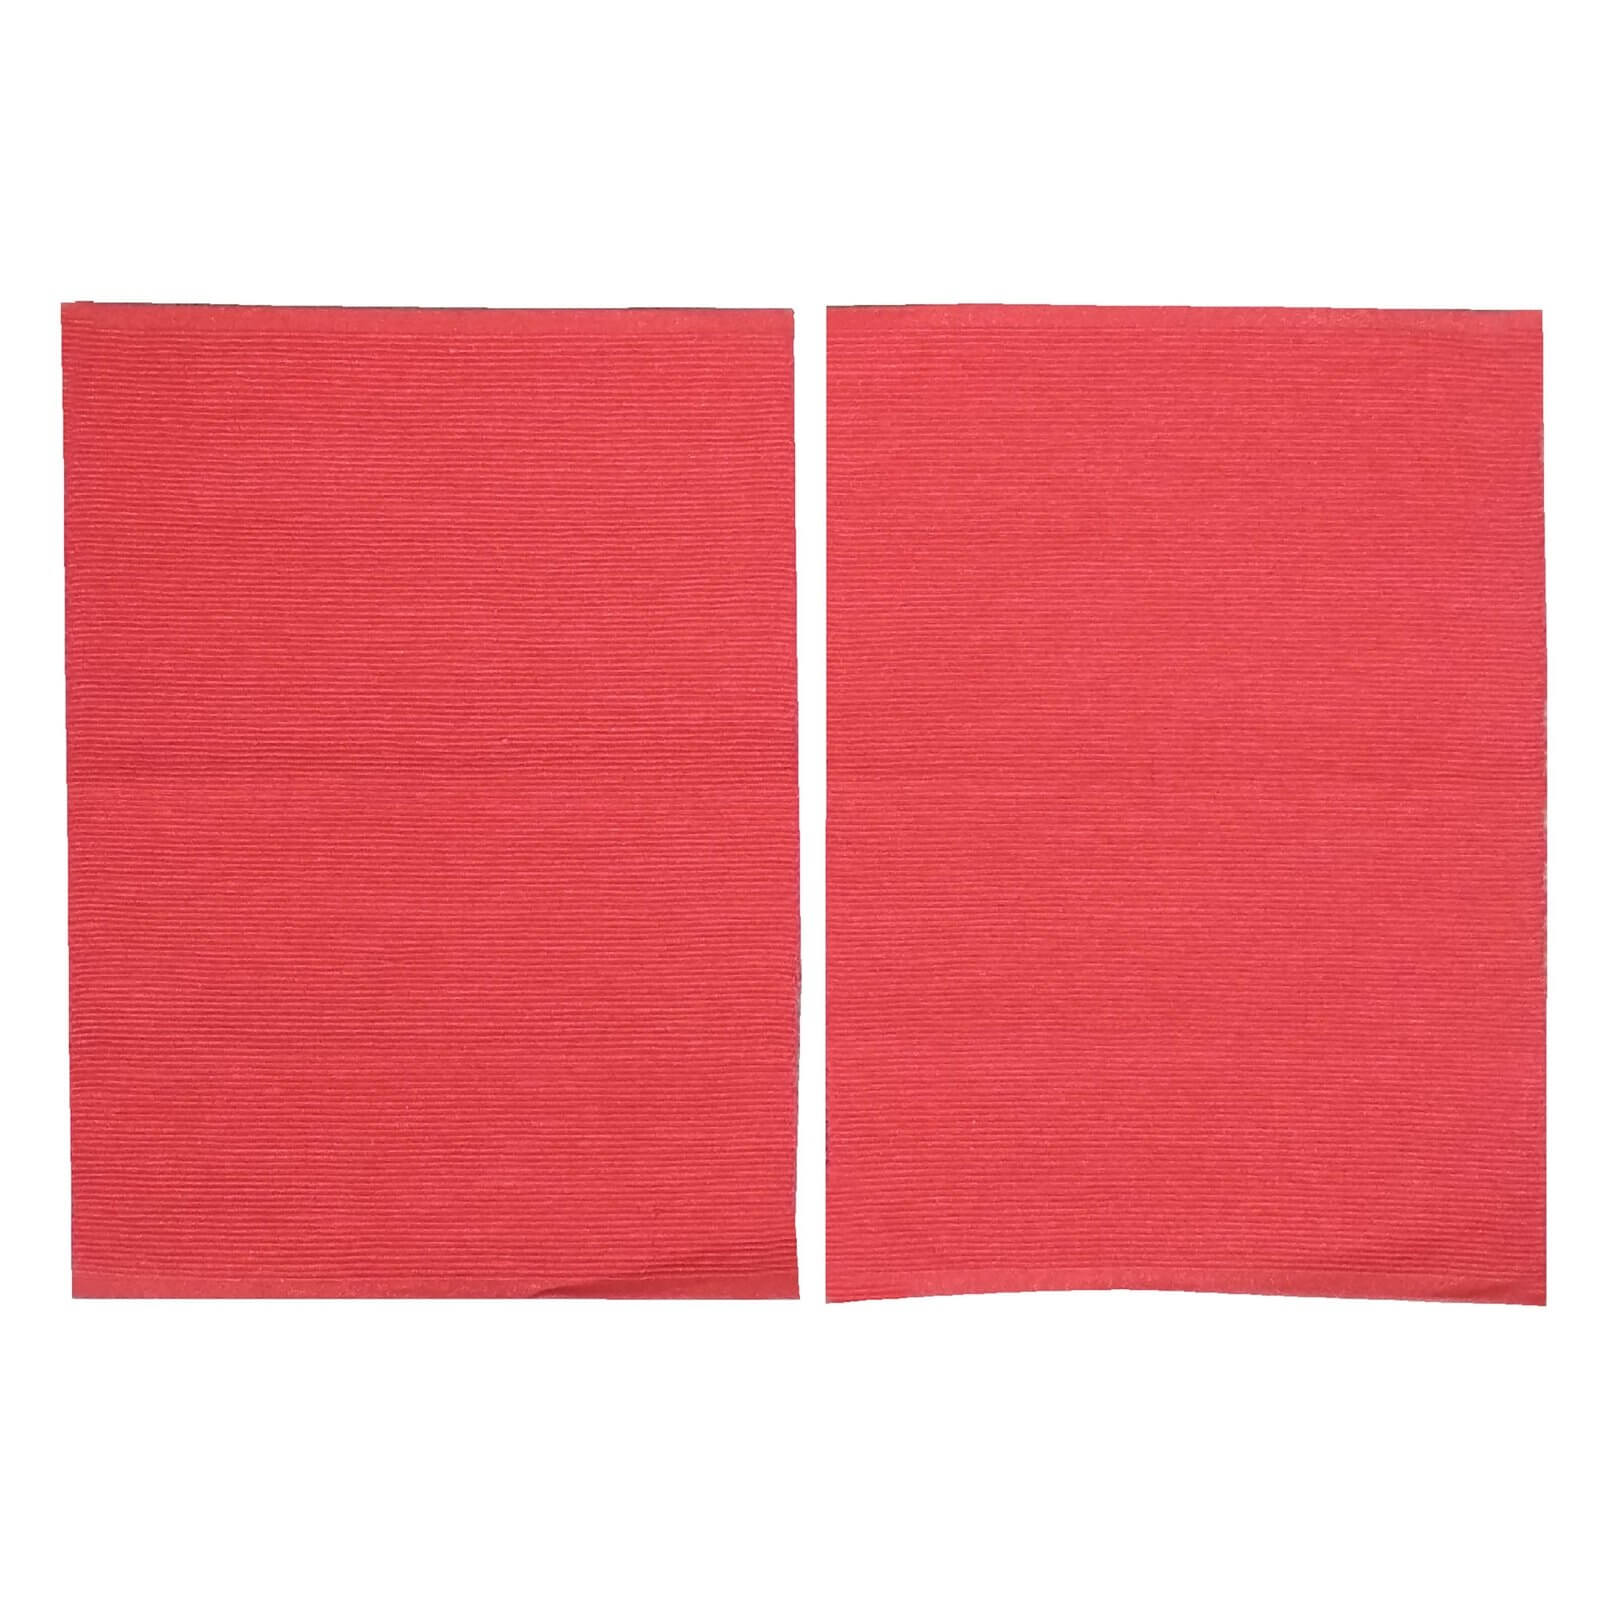 2 Red Lurex Rib Woven Placemats - 30x40cm